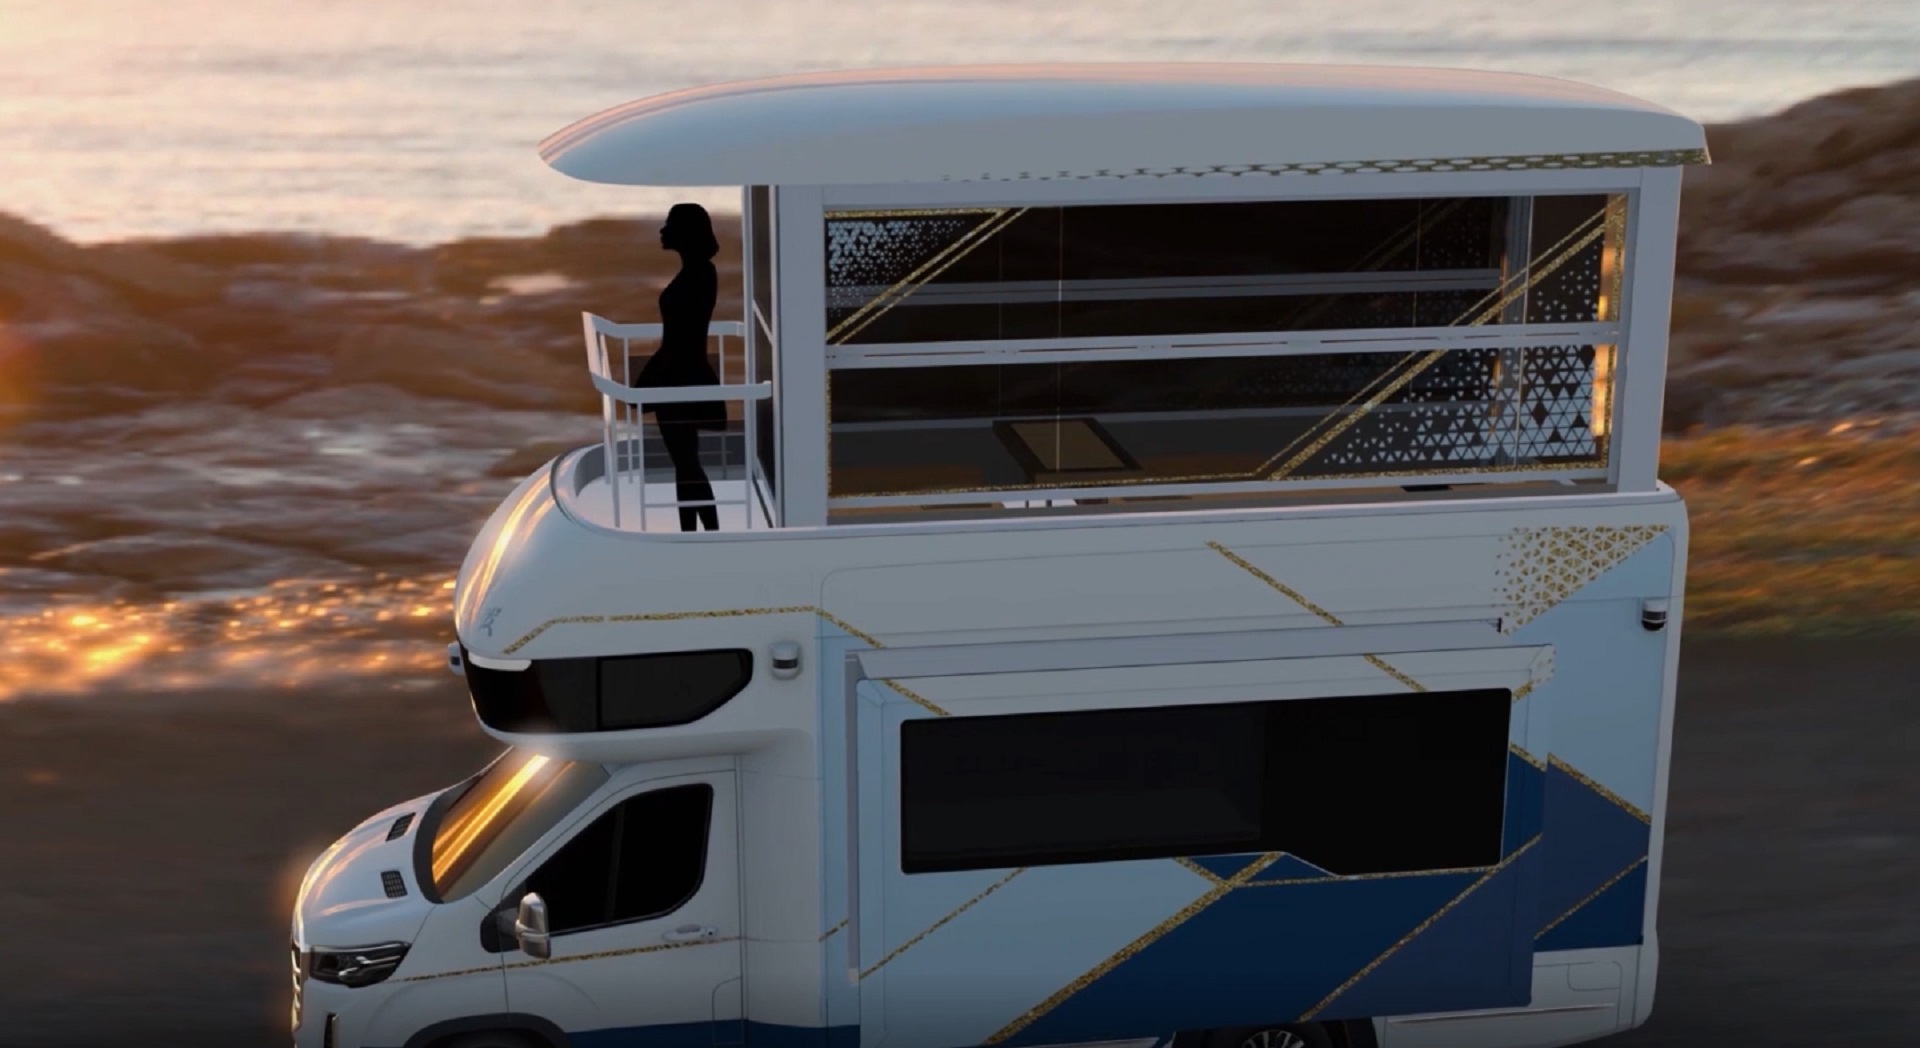 Photographic rendering of the SAIC Maxus V90 Villa Edition with sunroom raised and woman standing on the deck